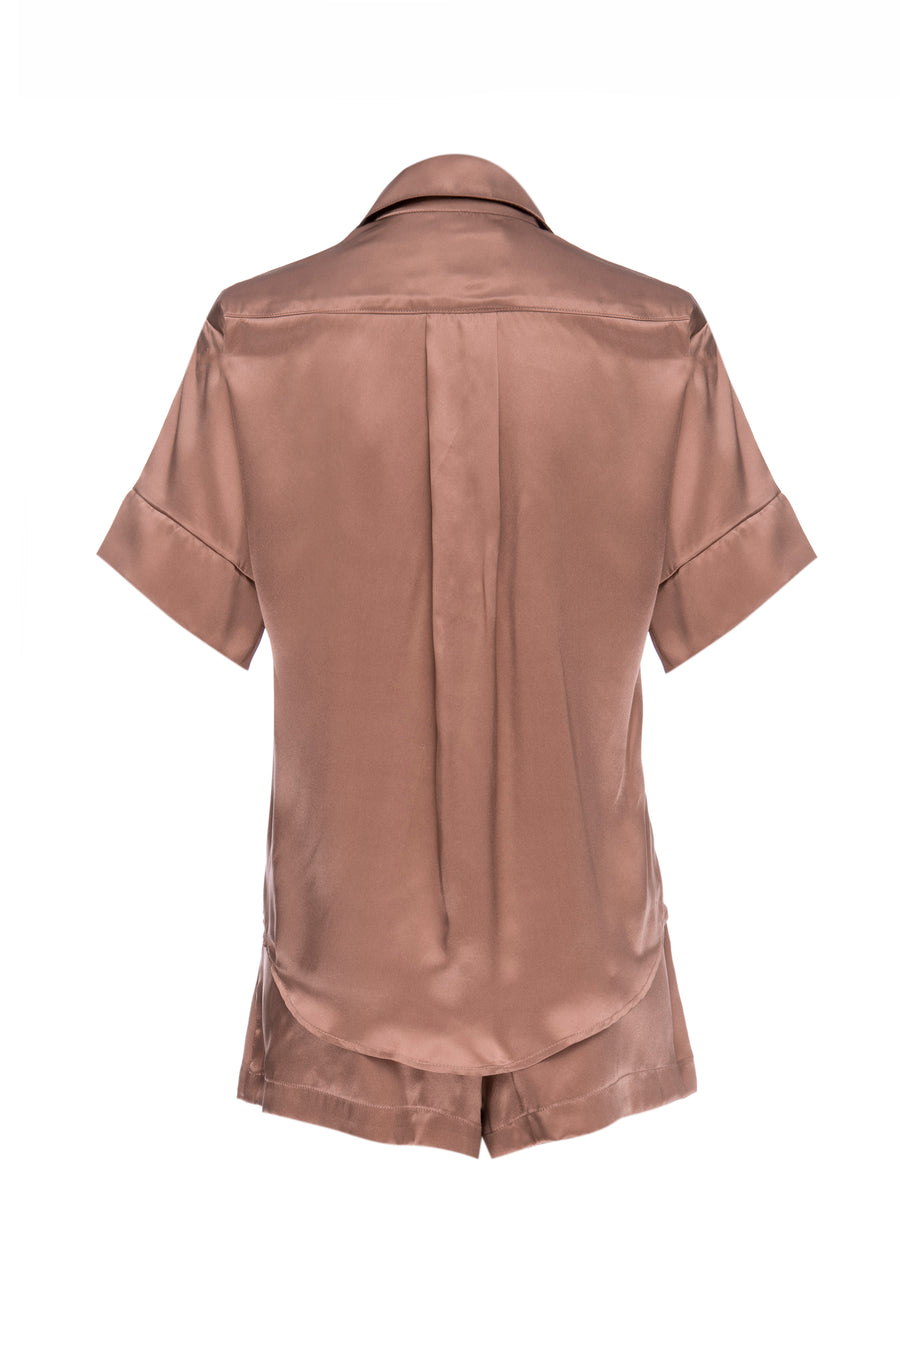 Silk Charmeuse Short Sleeved Top: Apricot